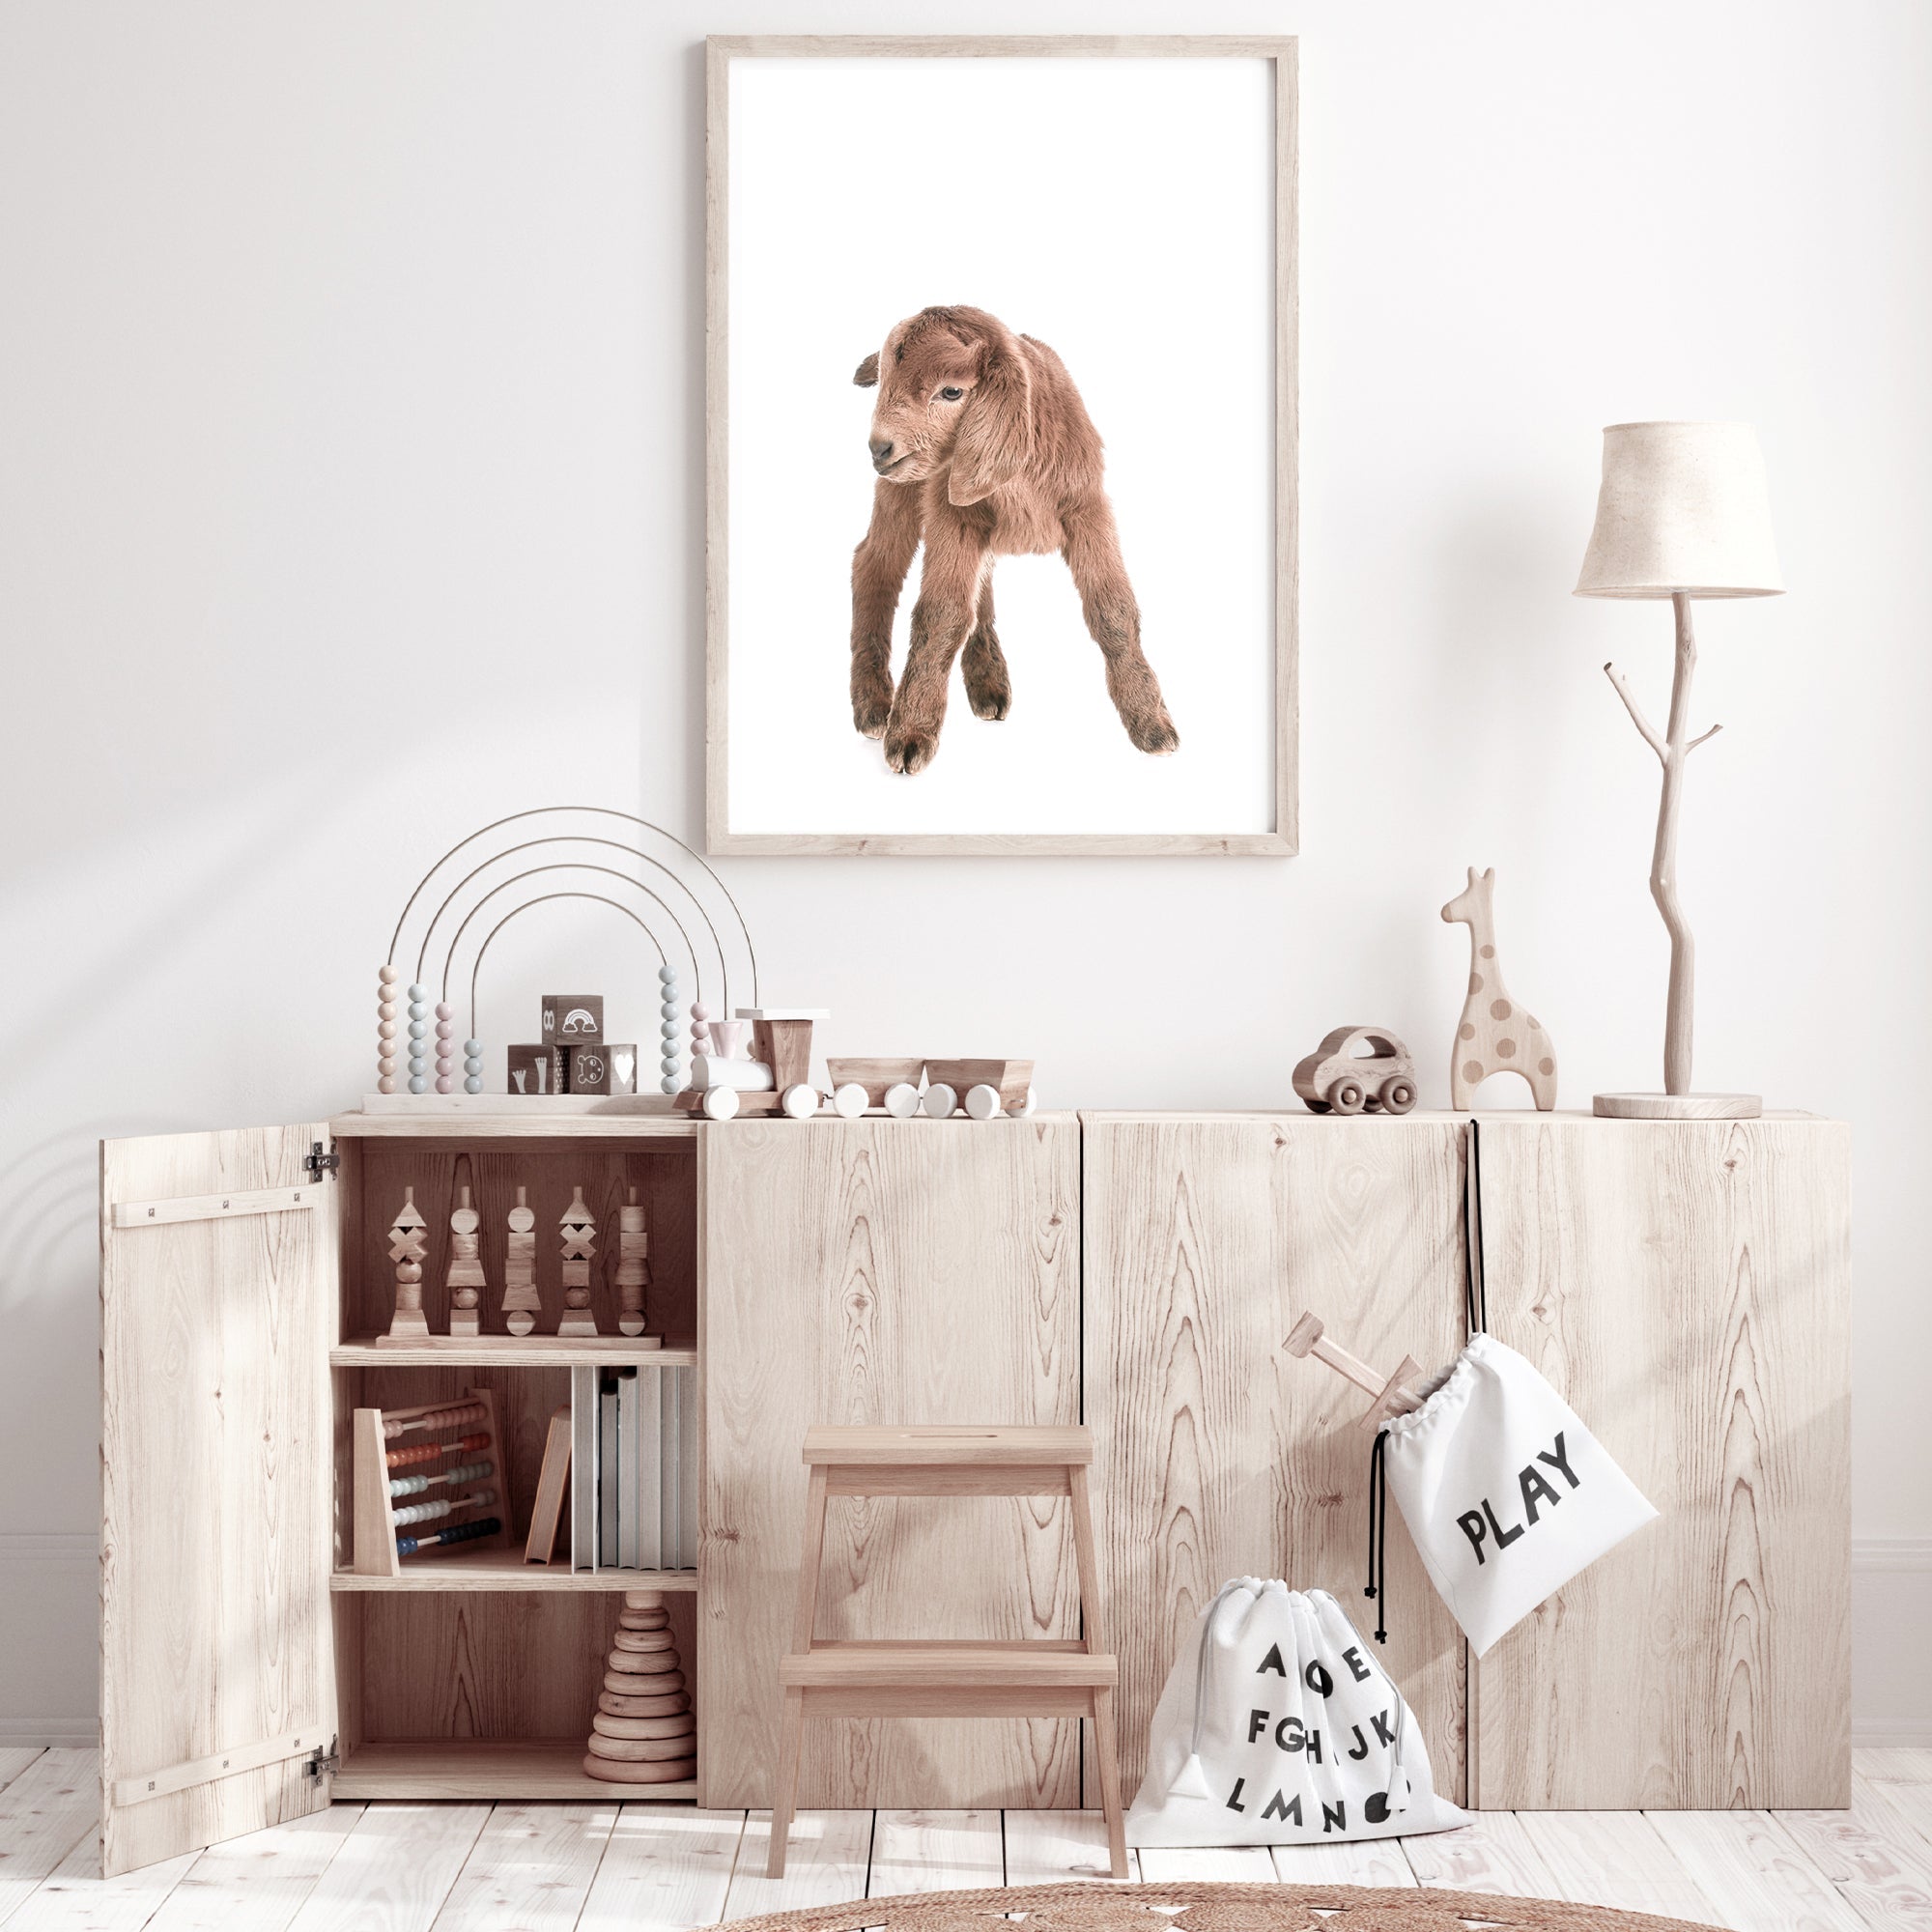 Featuring the animal Baby Goat photo art print, available in an unframed poster print, stretched canvas or with a timber, white or black frame.